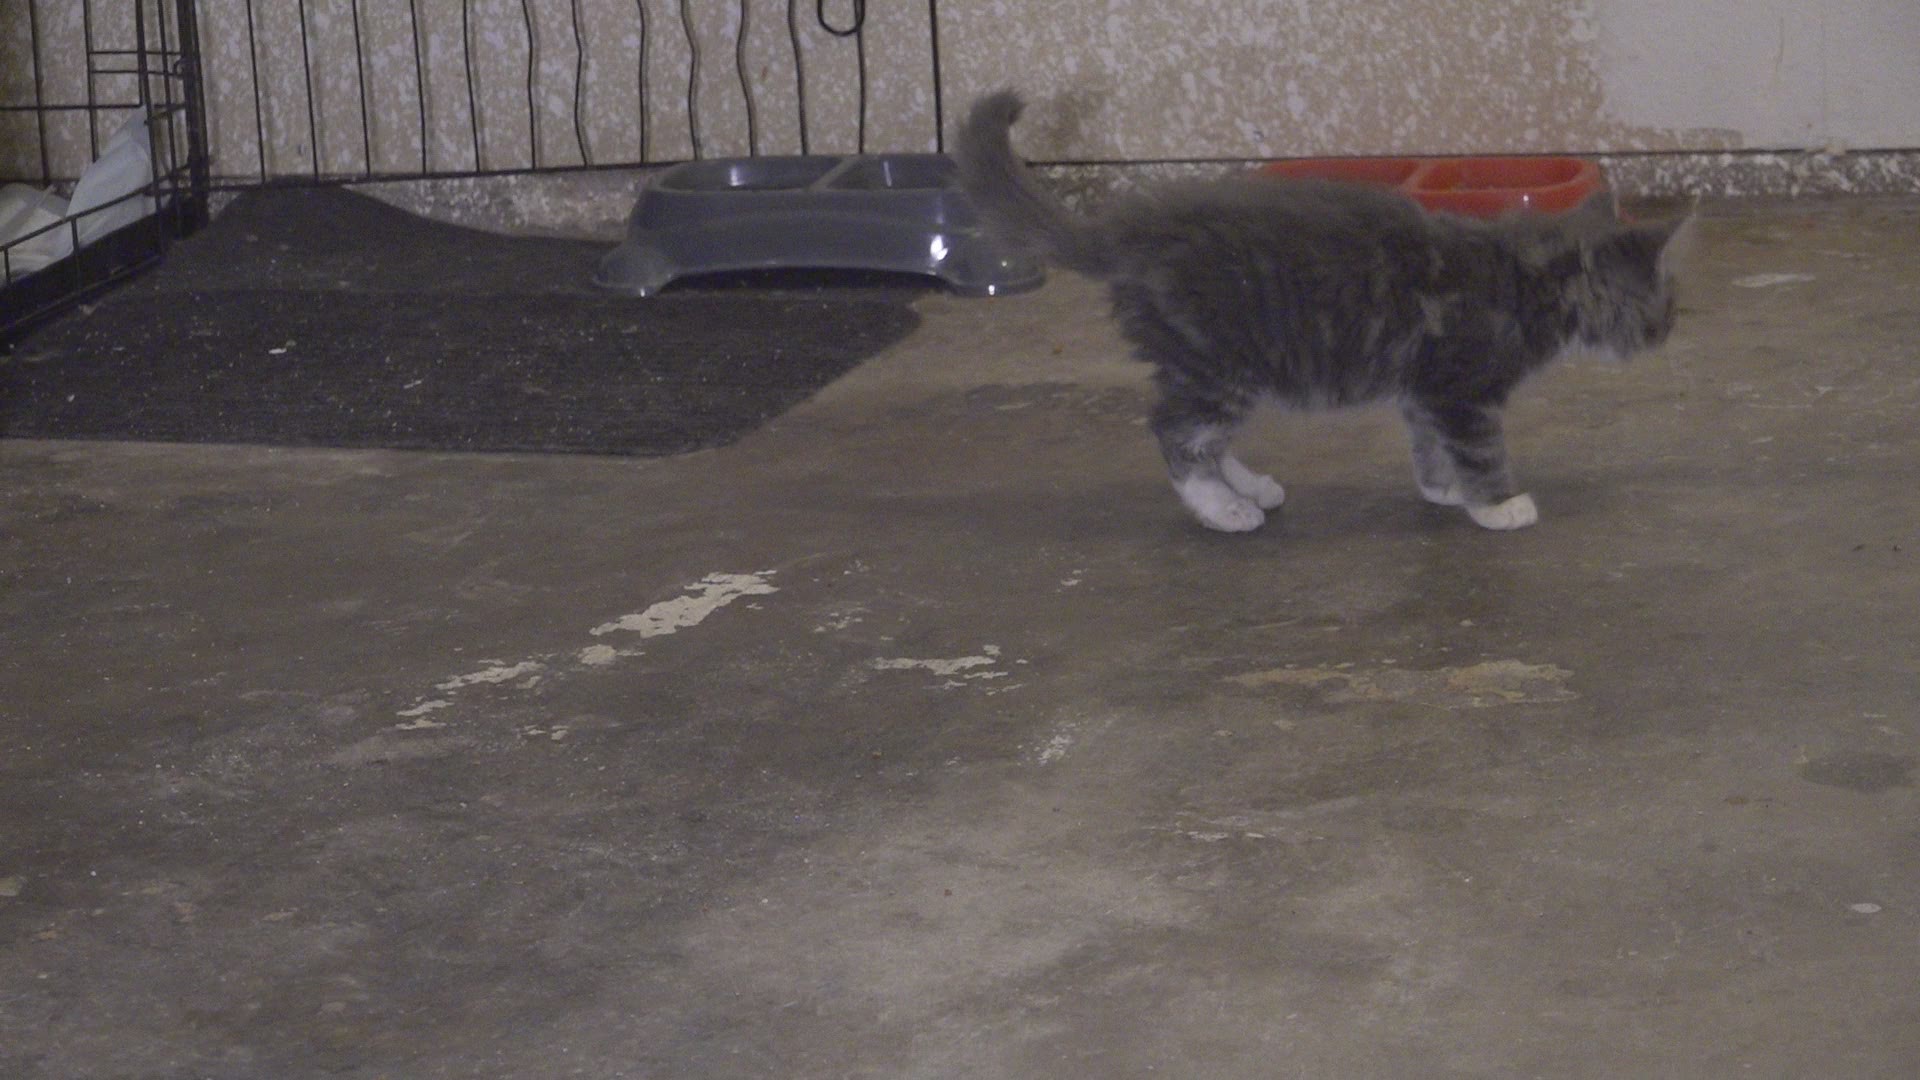 A litter of kittens is one of the many animals needing a home in the Greenwood neighborhood.